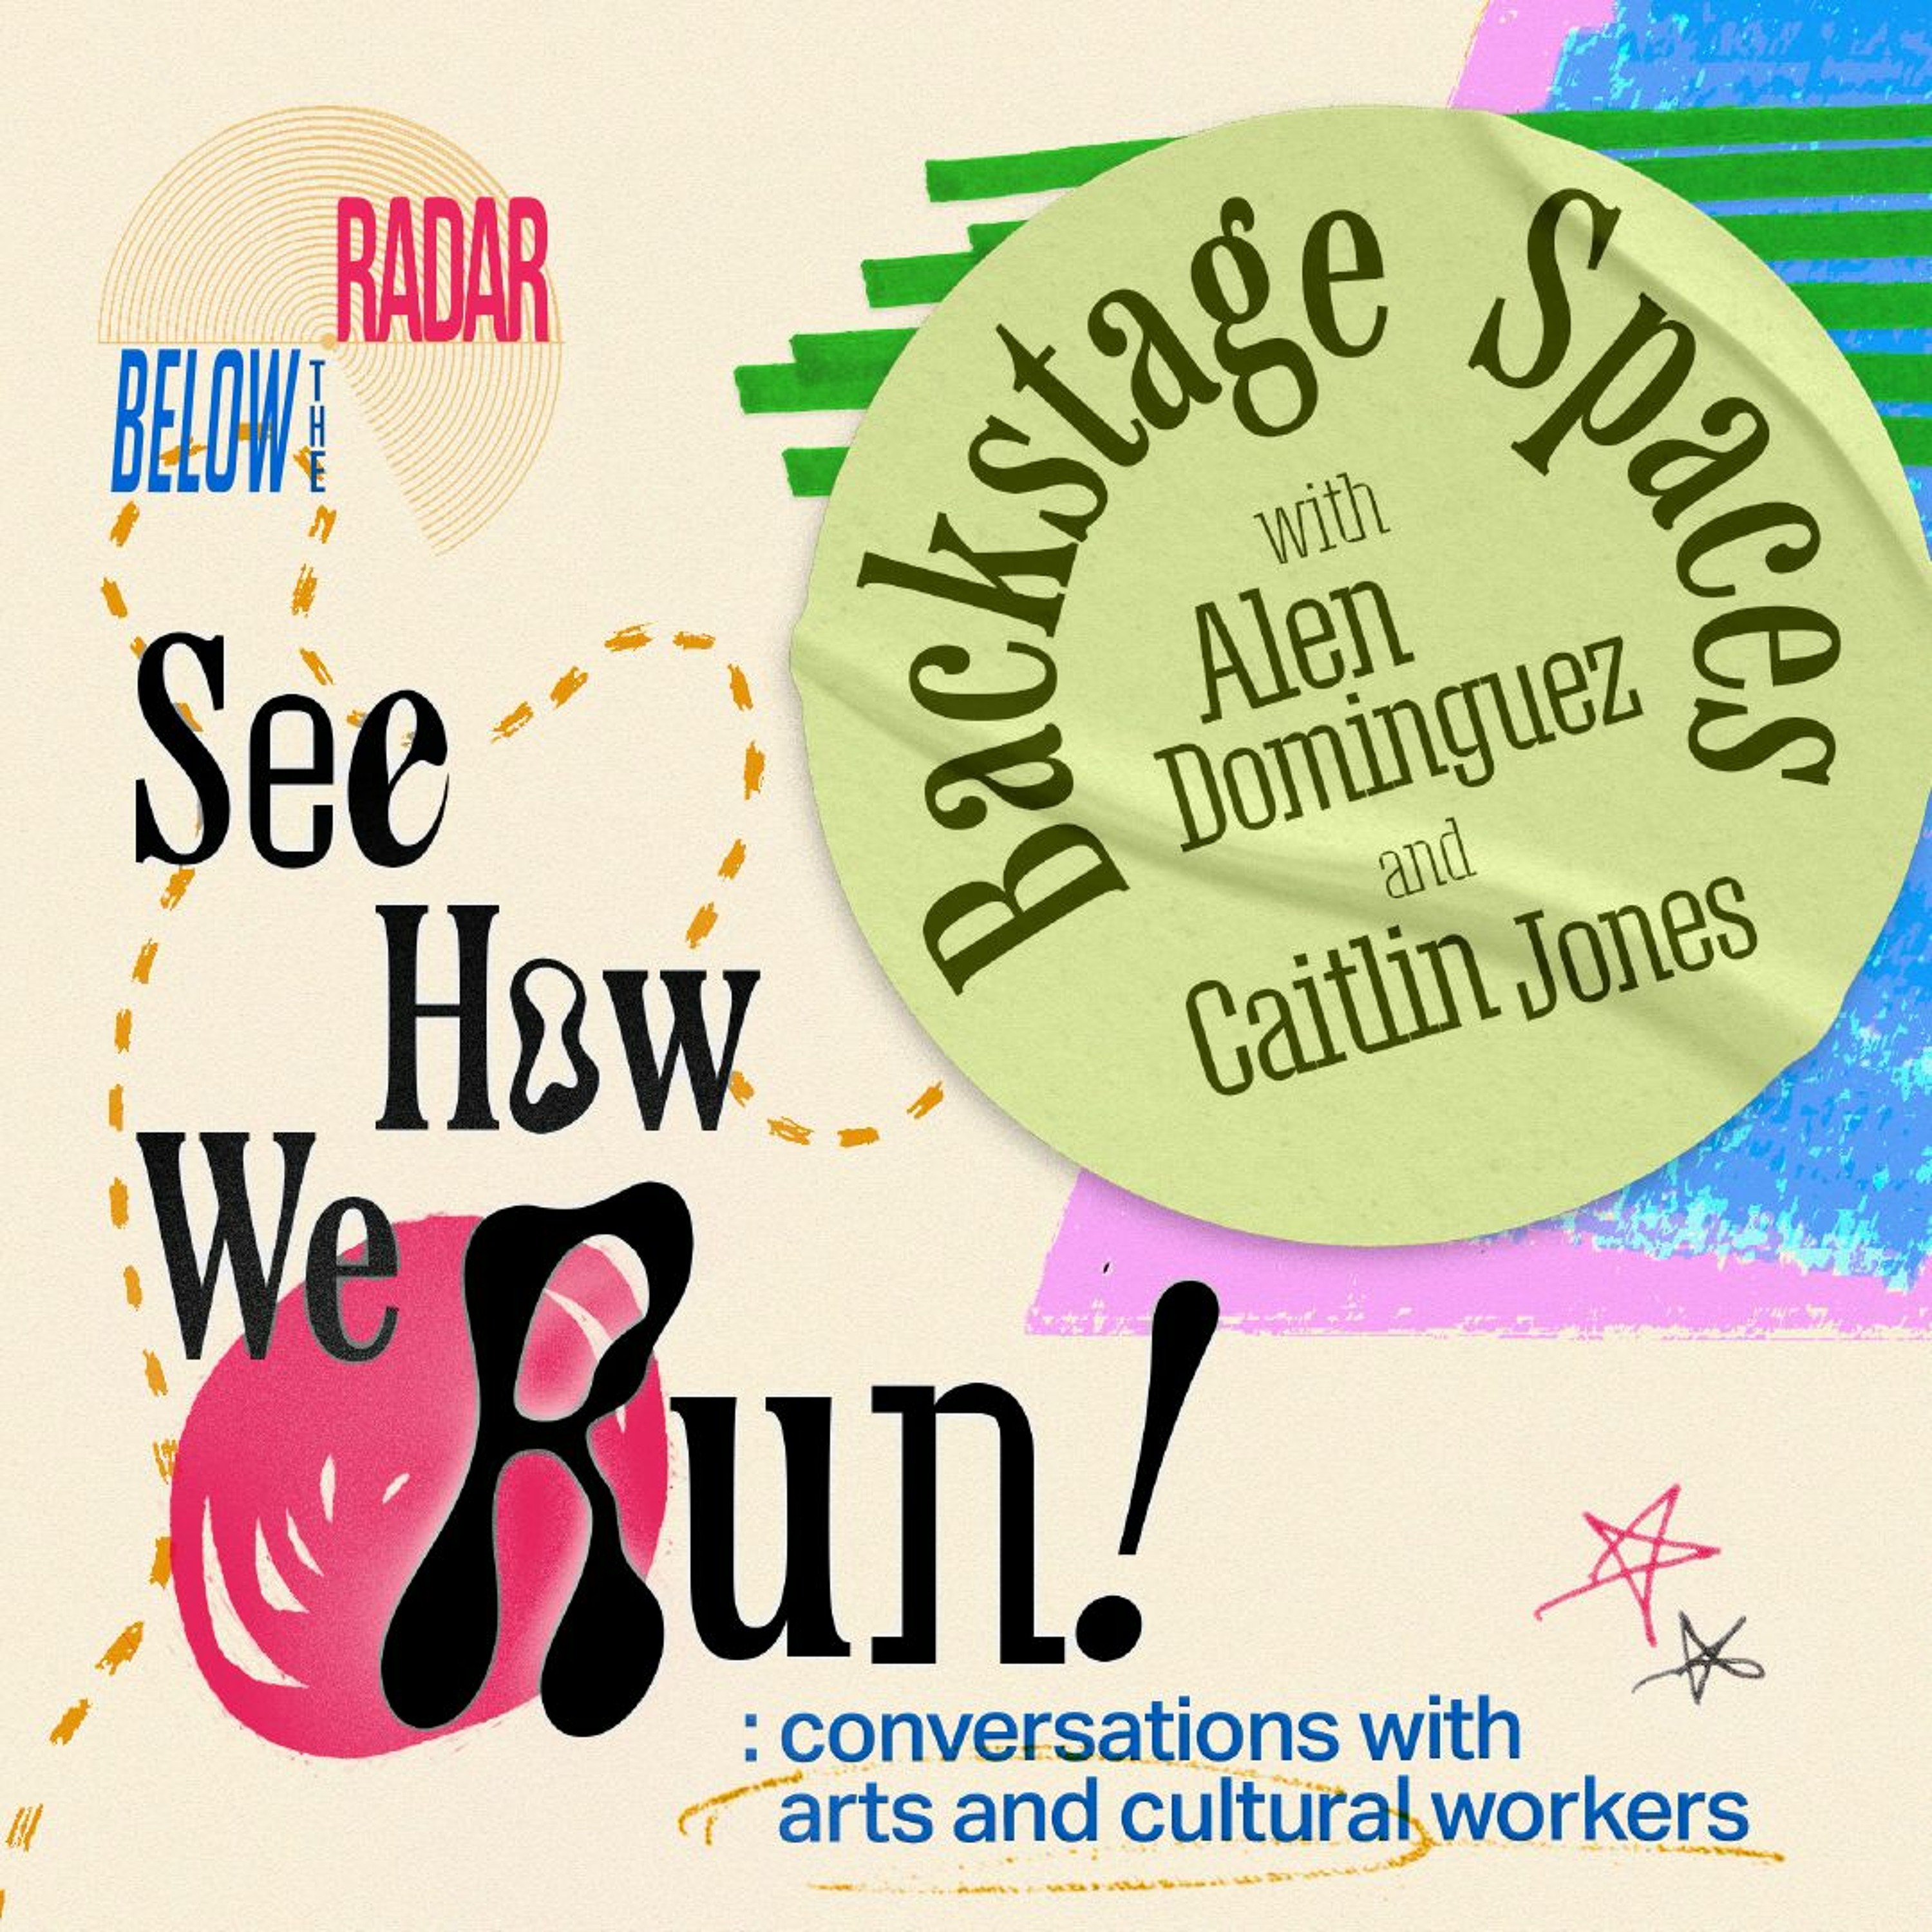 See How We Run! Backstage Spaces — with Alen Dominguez and Caitlin Jones